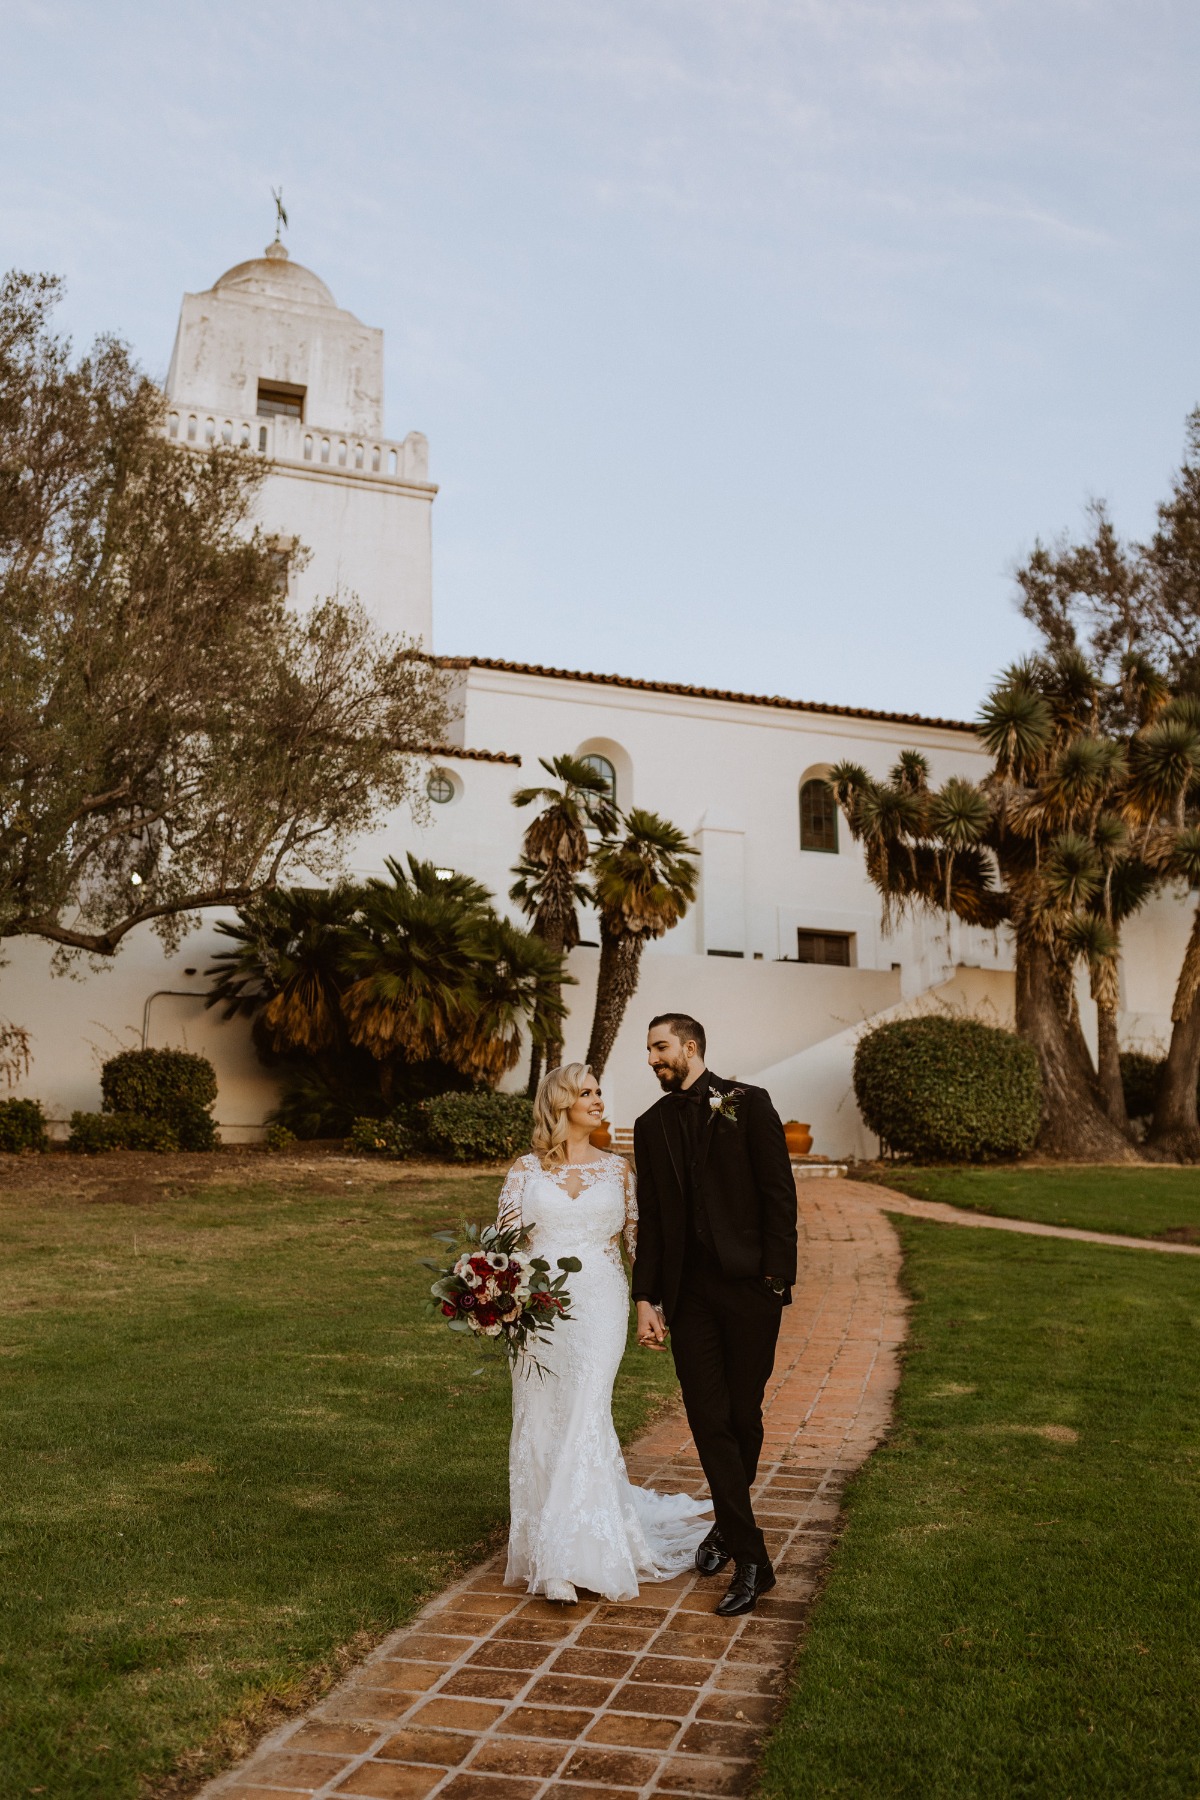 Black Was The Main Color At This Moody San Diego Wedding